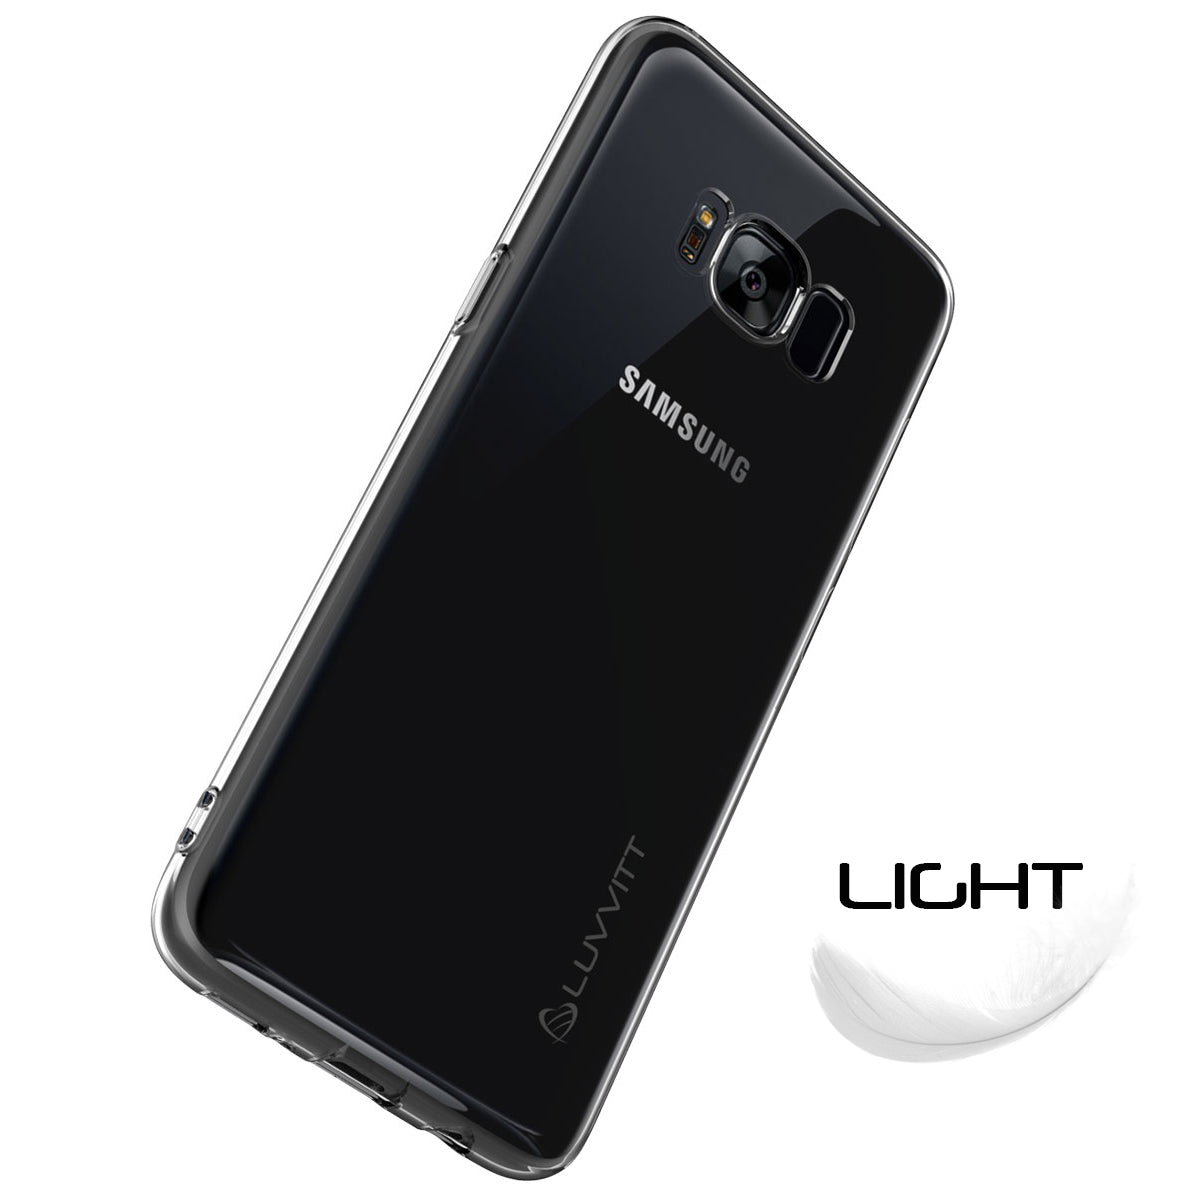 LUVVITT CLARITY Case for Galaxy S8 Plus - Clear